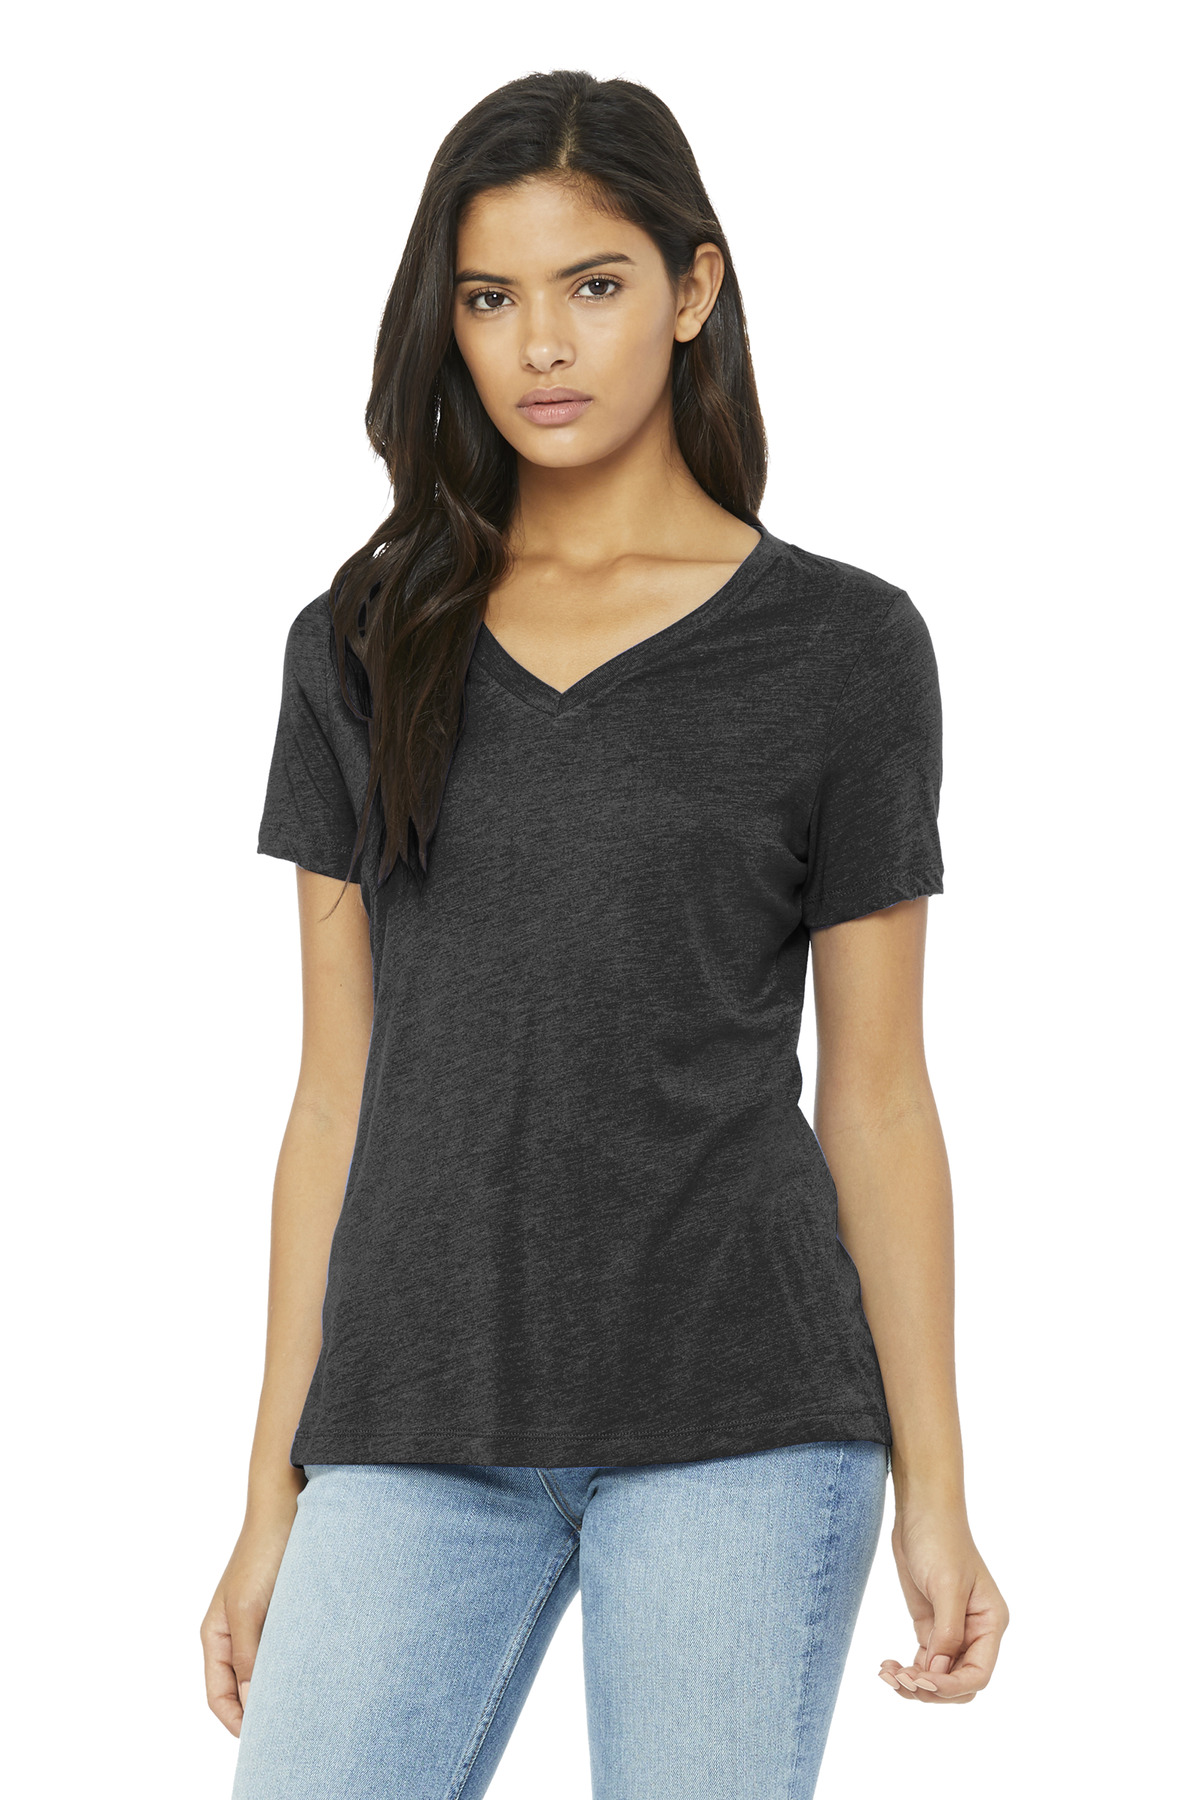 BELLA+CANVAS Womens Relaxed Triblend V-Neck Tee BC6415